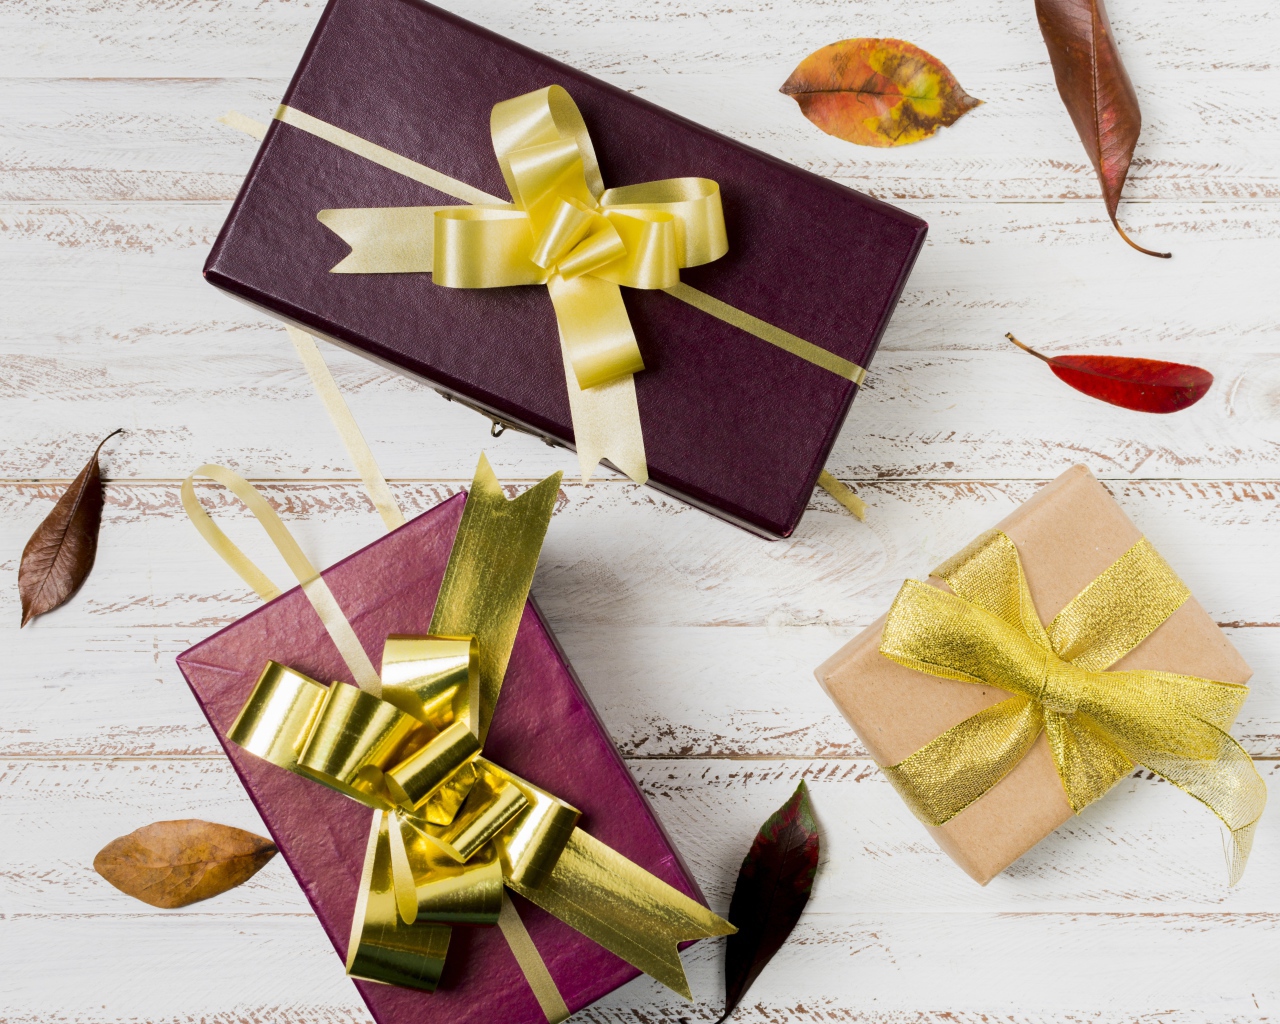 Three gift boxes with bows on the table